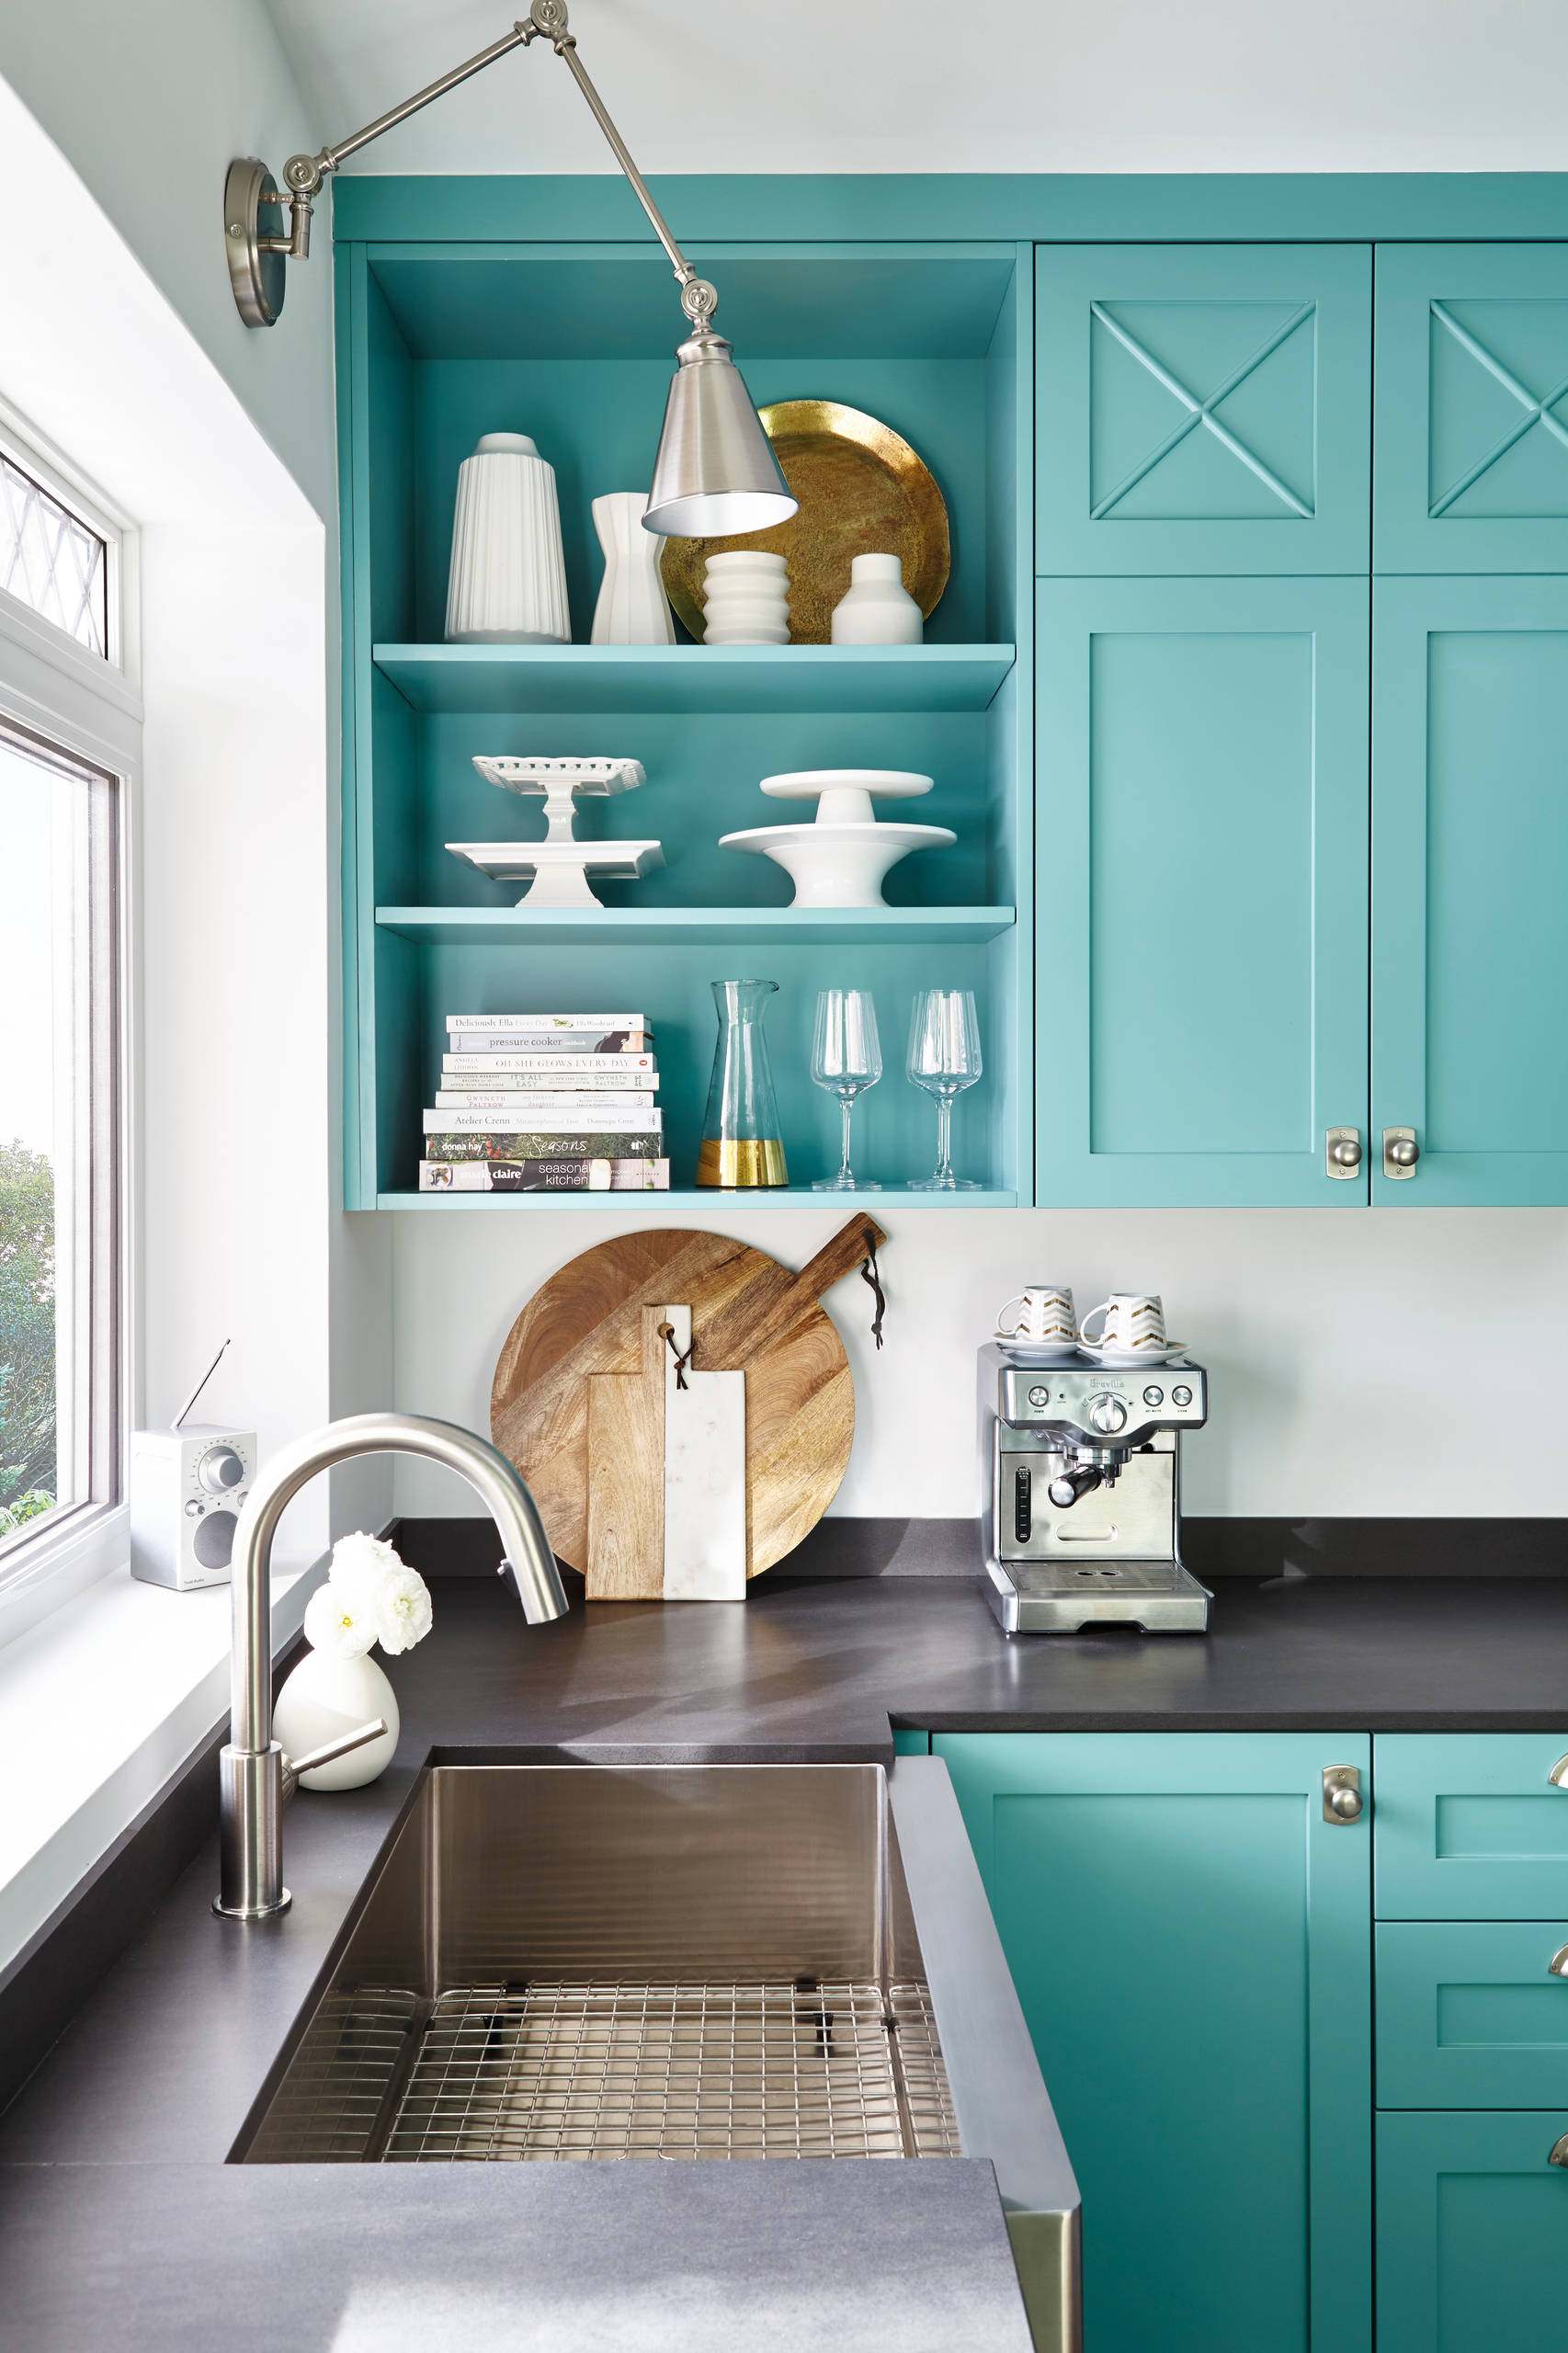 20 Turquoise Kitchen Ideas You'll Love   June, 20   Houzz